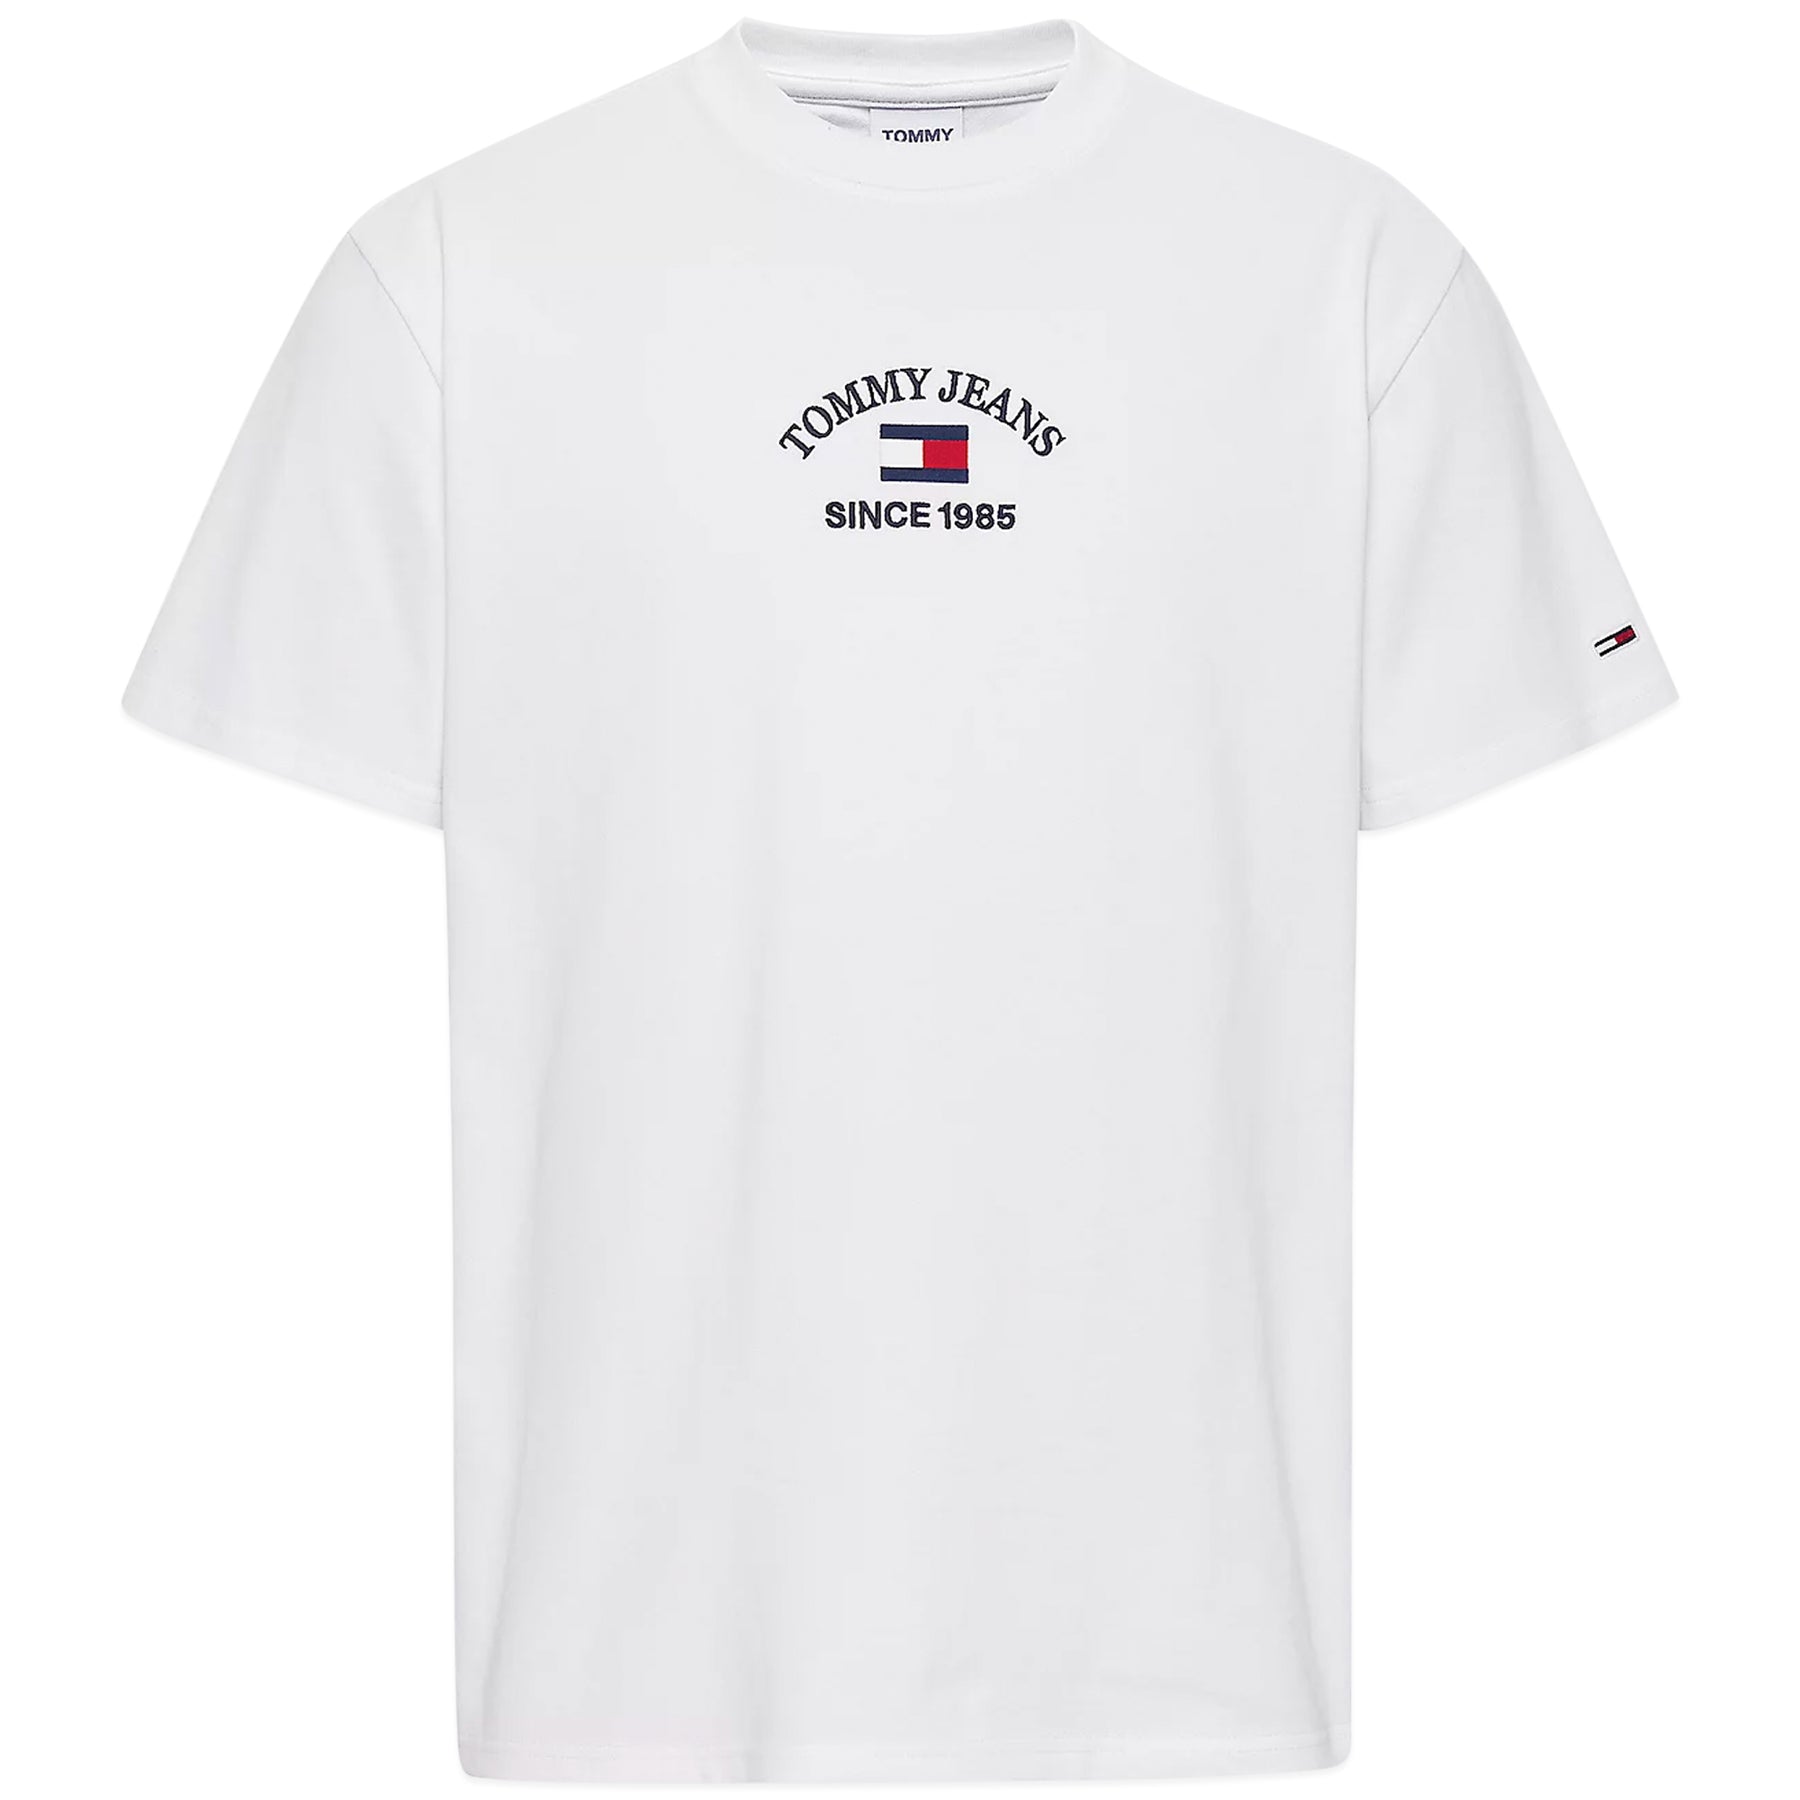 accumuleren Extreme armoede Orkaan Tommy Jeans Timeless Flocked Flag T-Shirt - White